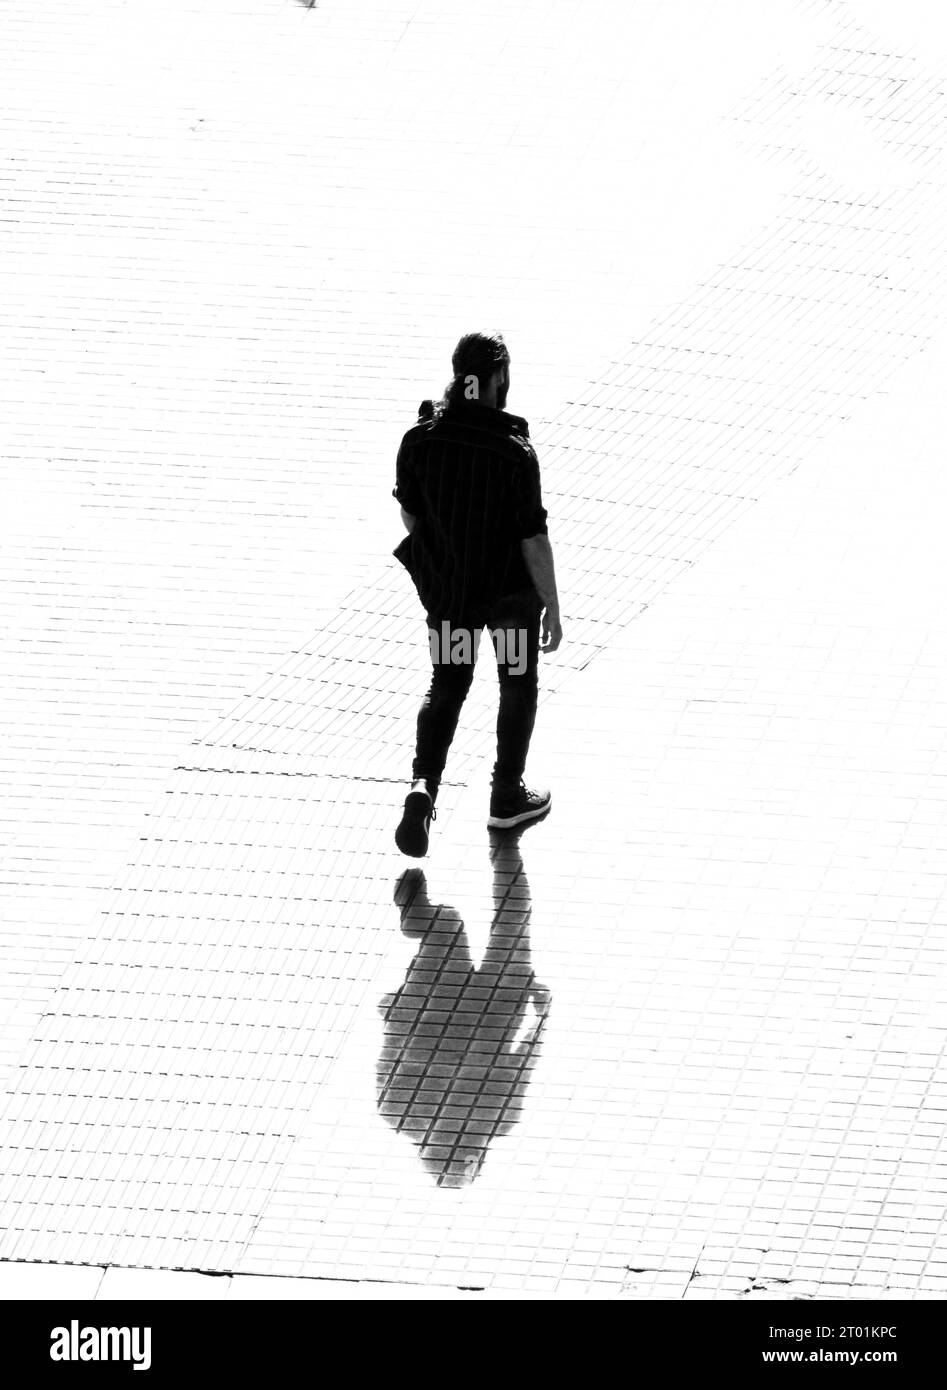 Rear view of a man walking on a pavement. Stock Photo